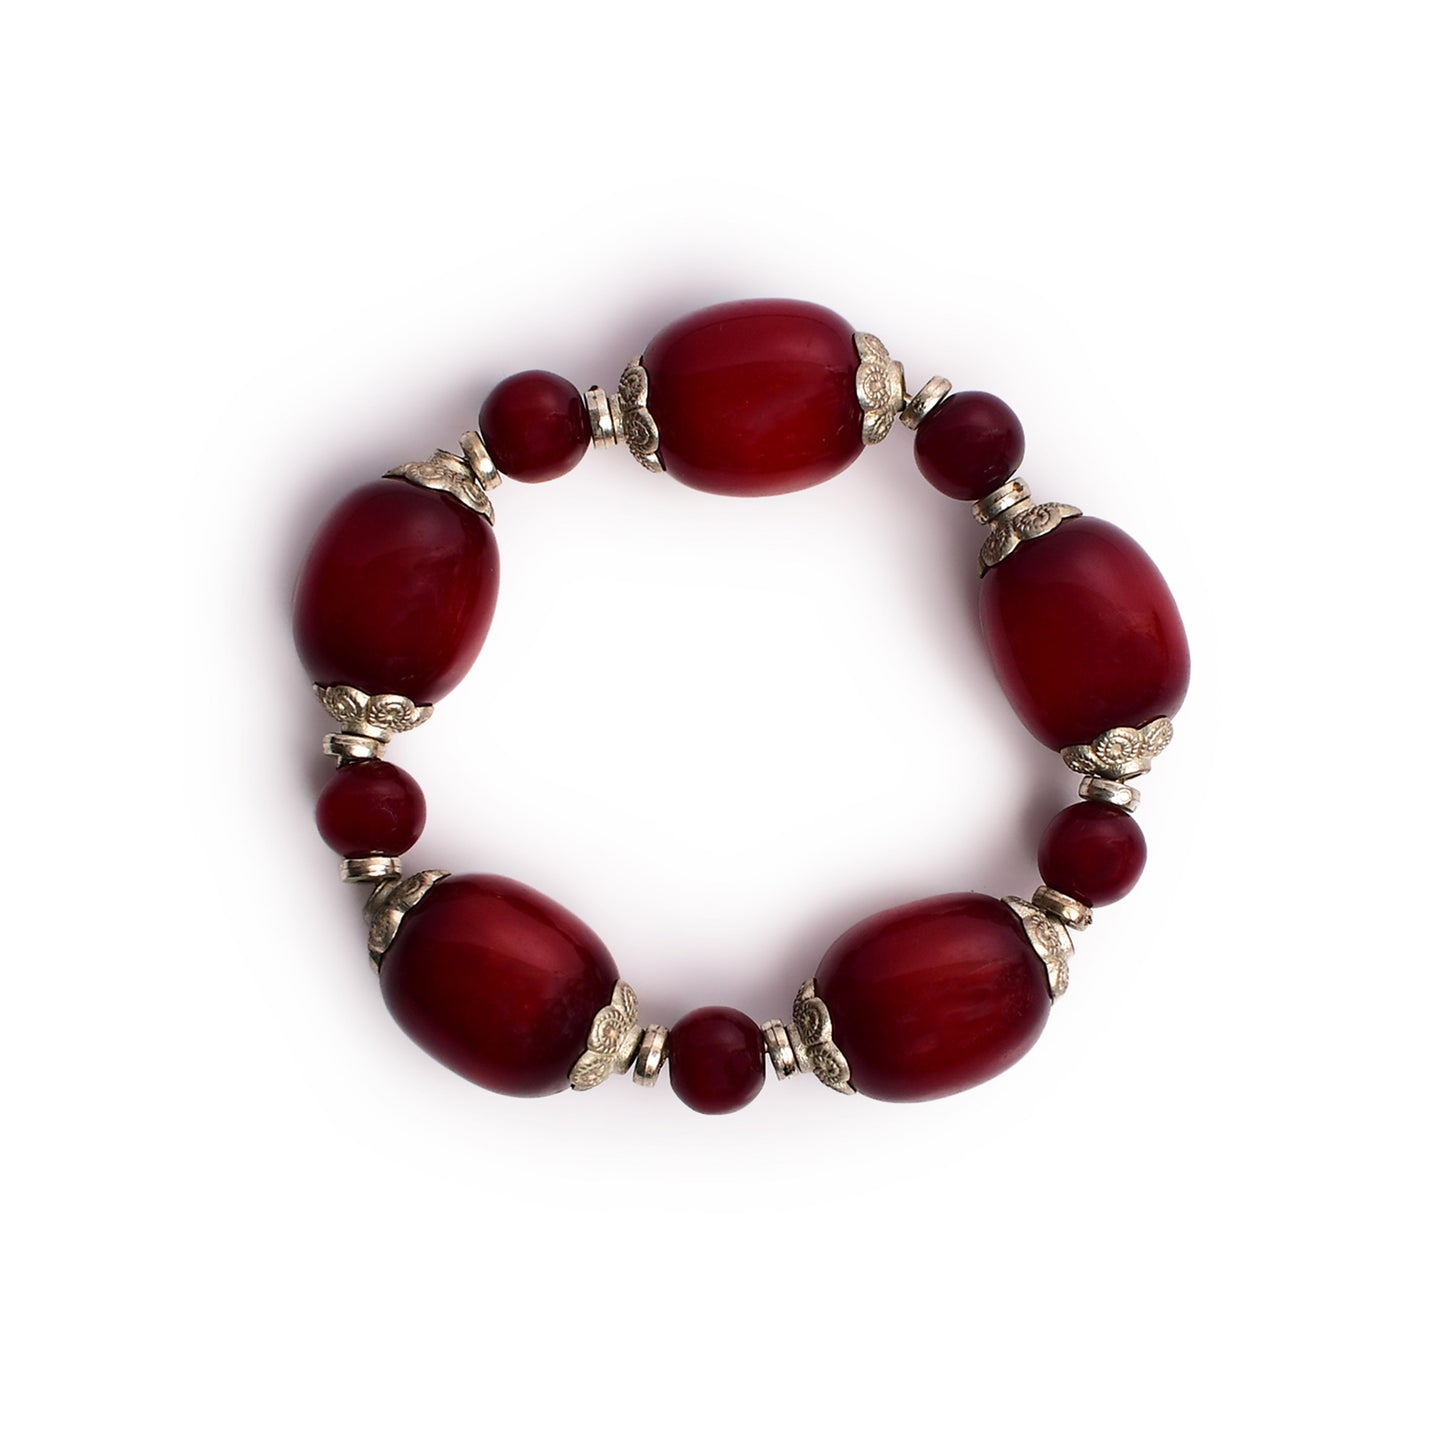 Maroon & Silver Stone Stretchable Bracelet by Bamboo Tree Jewels